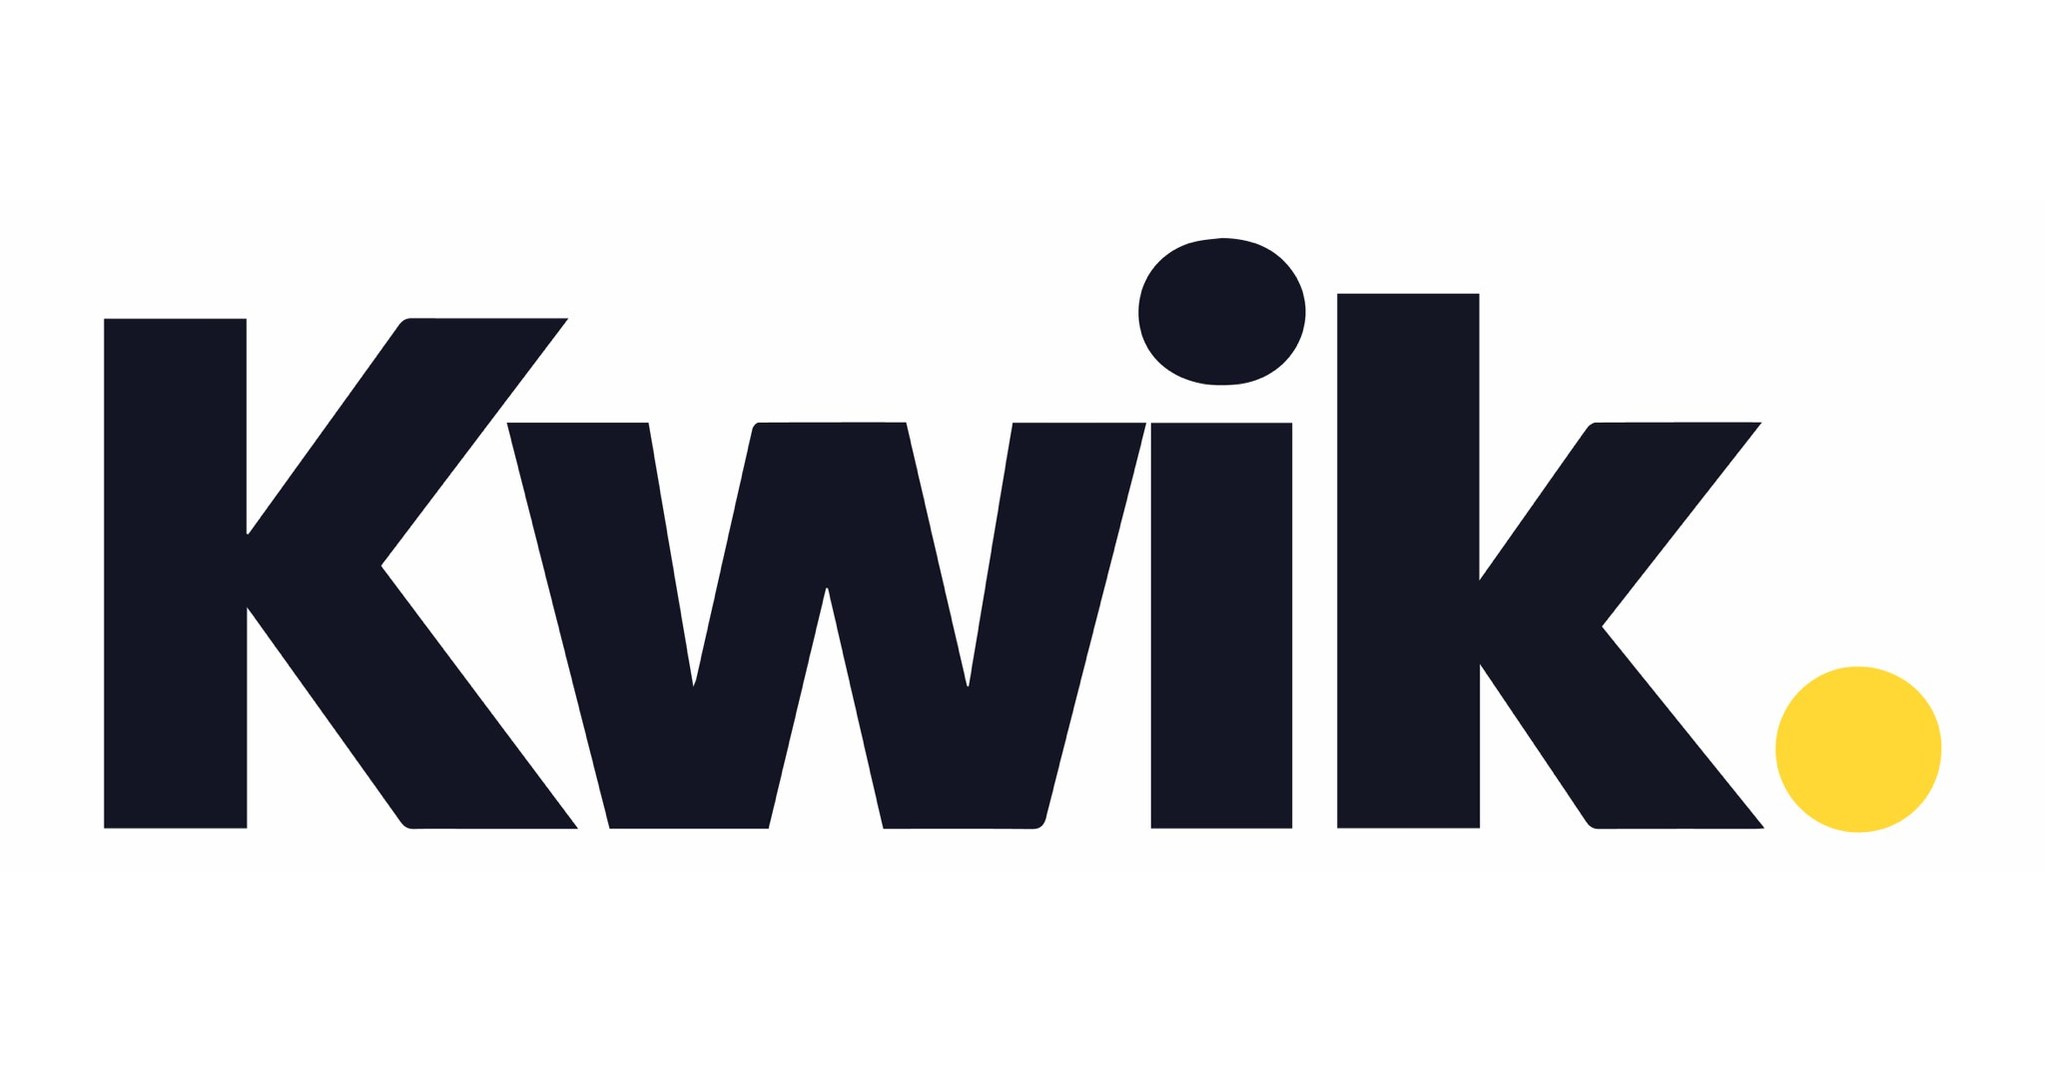 KWIK’s Difference- Providing Verified Reviews In A Trillion-Dollar E-Commerce Sector